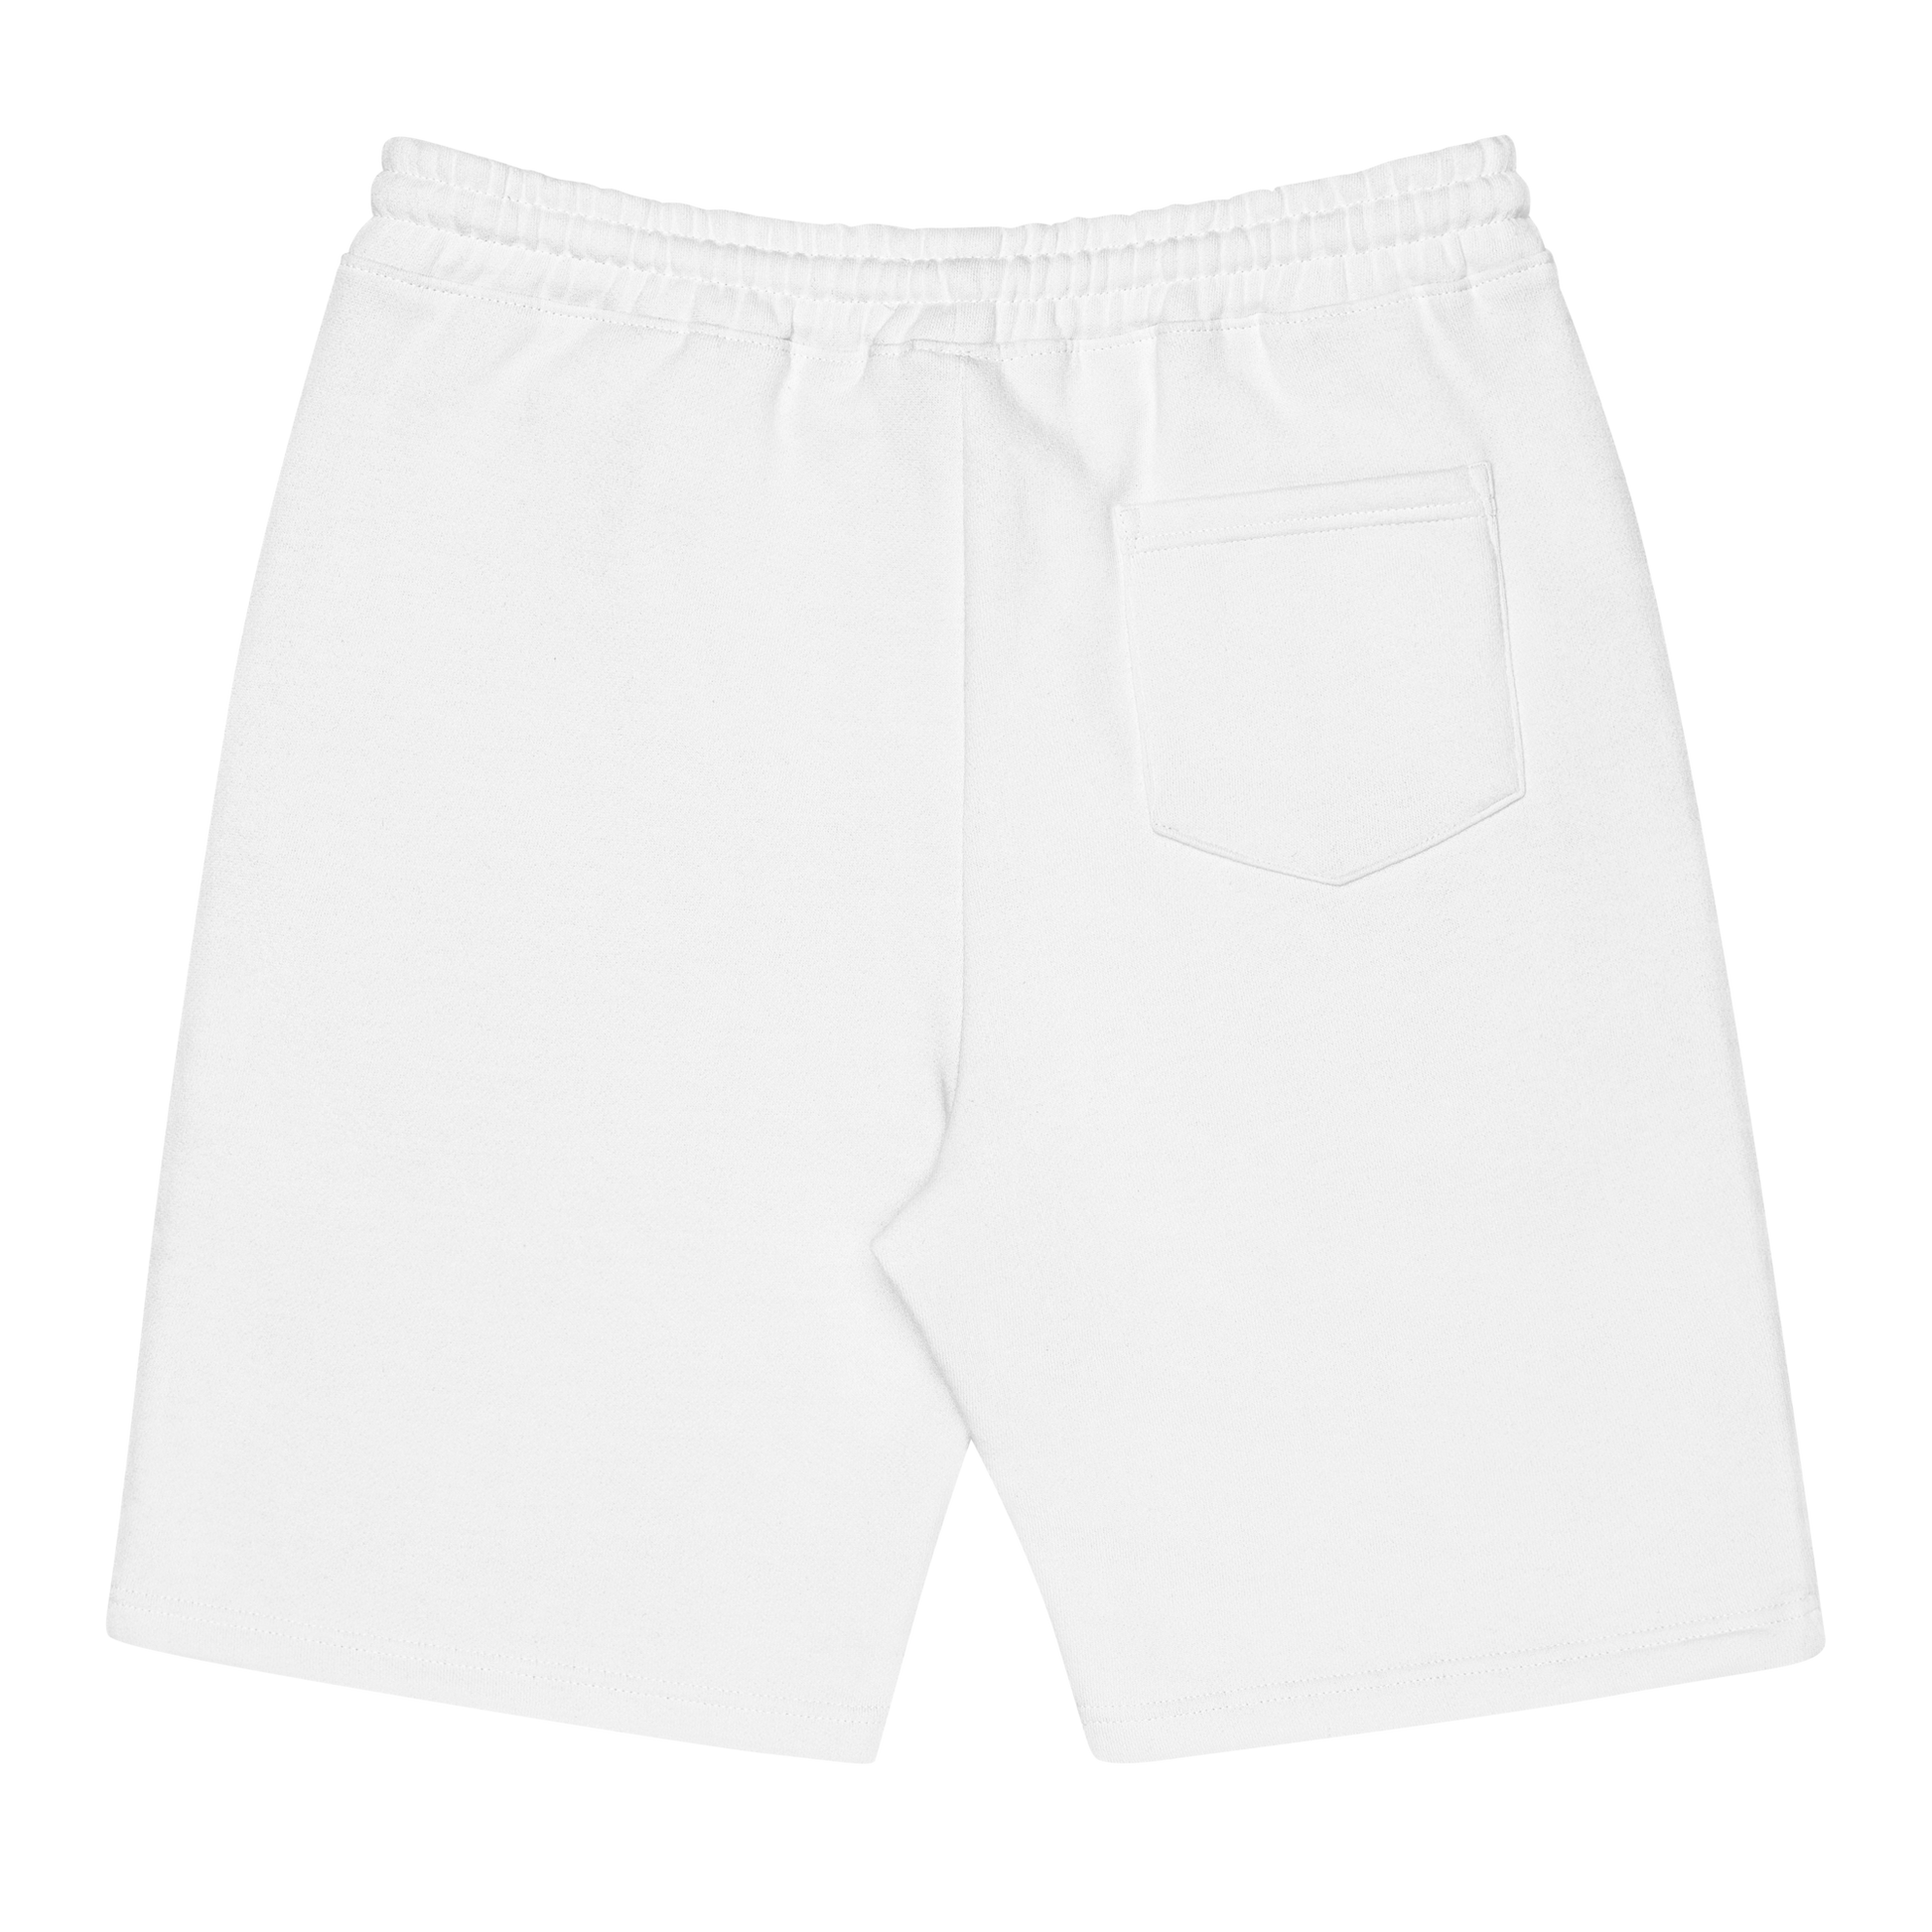 Back of a Men's White Fleece Shorts featuring an embroidered Boozy Fox logo on front